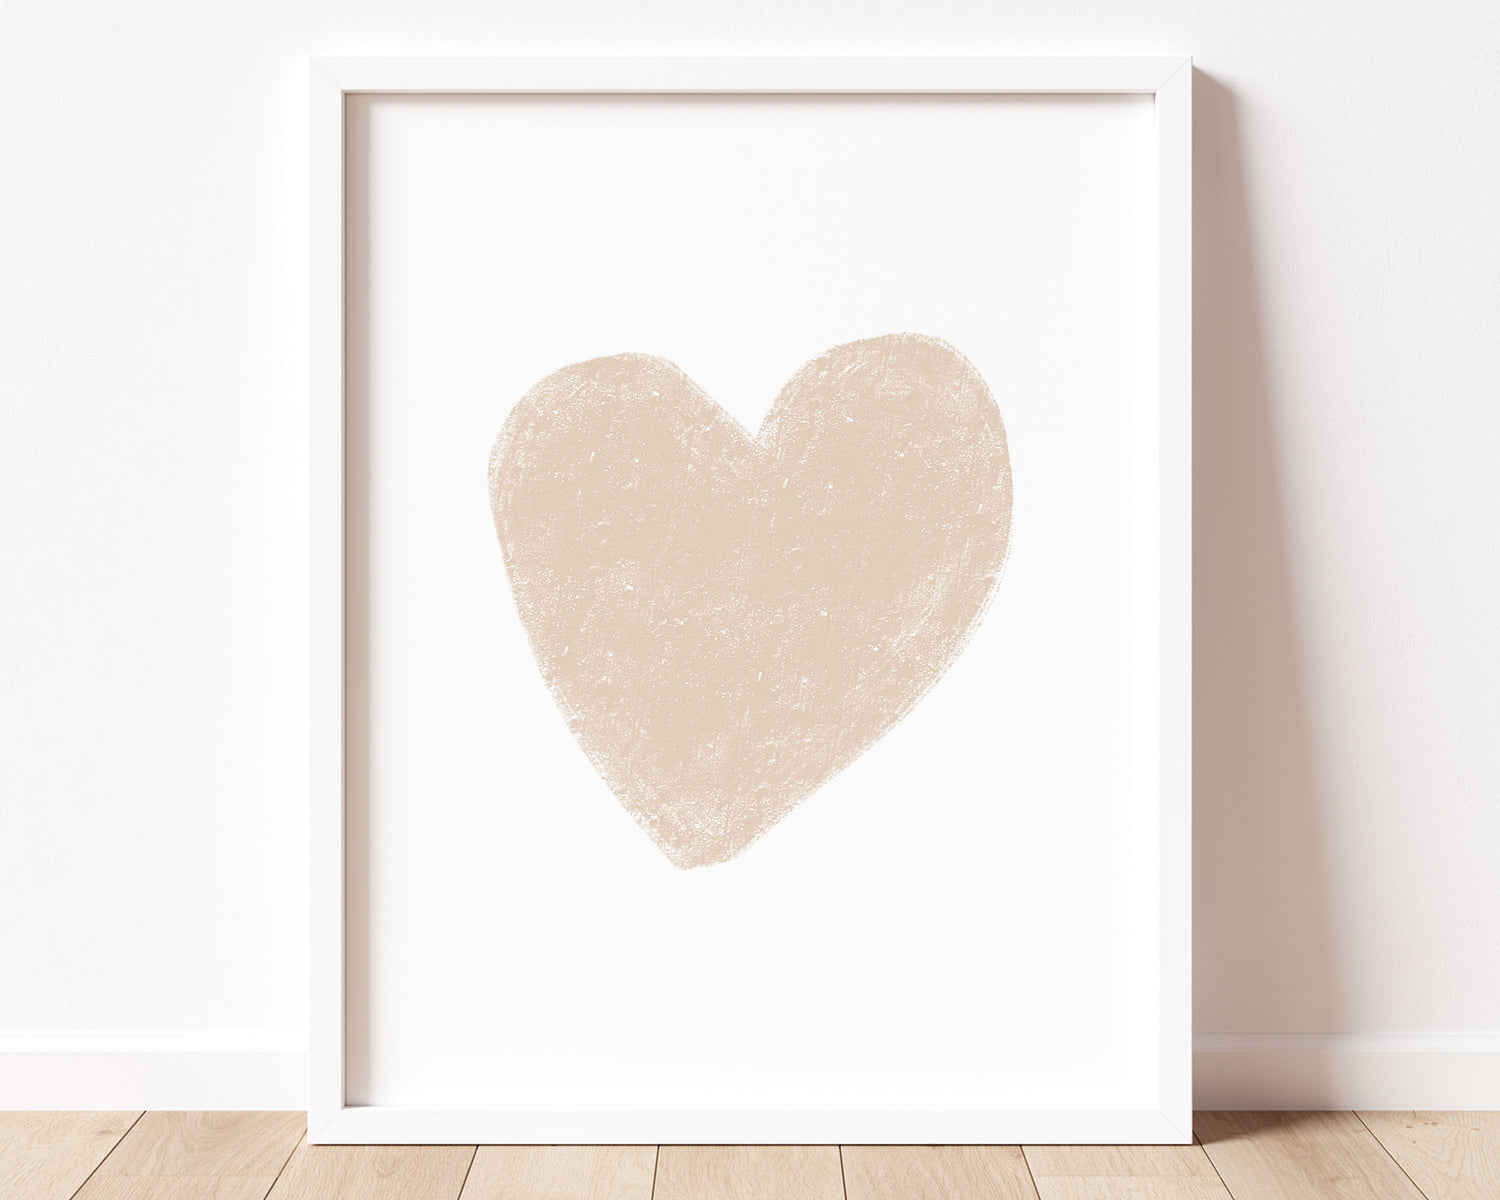 Neutral beige heart in chalky brushstroke illlustration style perfect for Baby Nursery Décor, Little Boys Bedroom Wall Art, Toddler Girls Room Wall Hangings, Kiddos Bathroom Wall Art and Childrens Playroom Décor.